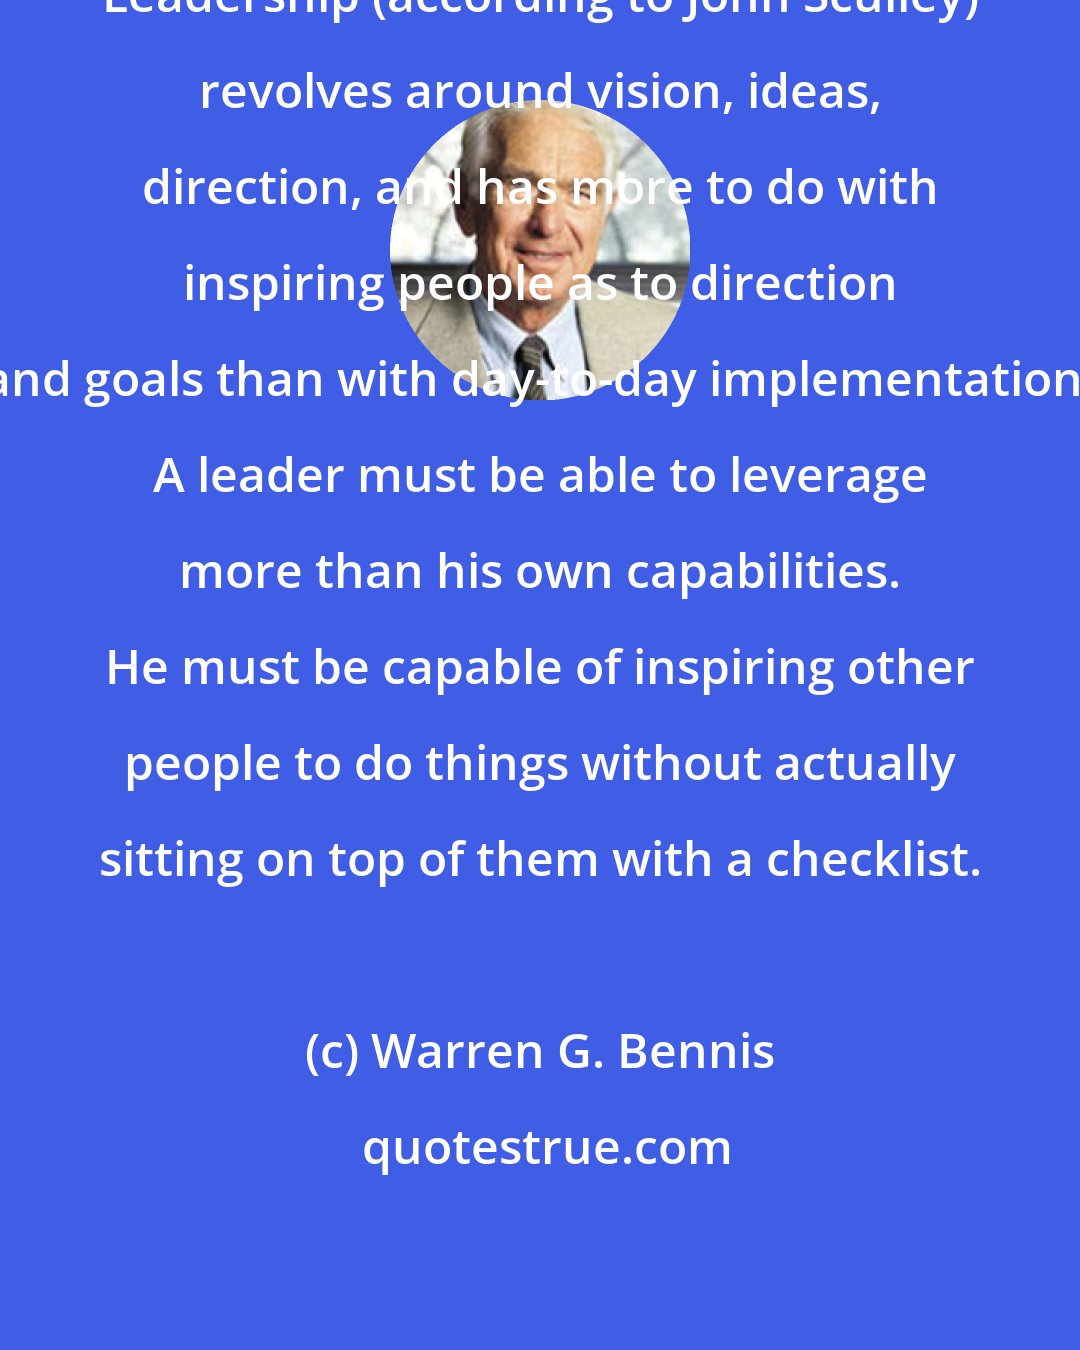 Warren G. Bennis: Leadership (according to John Sculley) revolves around vision, ideas, direction, and has more to do with inspiring people as to direction and goals than with day-to-day implementation. A leader must be able to leverage more than his own capabilities. He must be capable of inspiring other people to do things without actually sitting on top of them with a checklist.